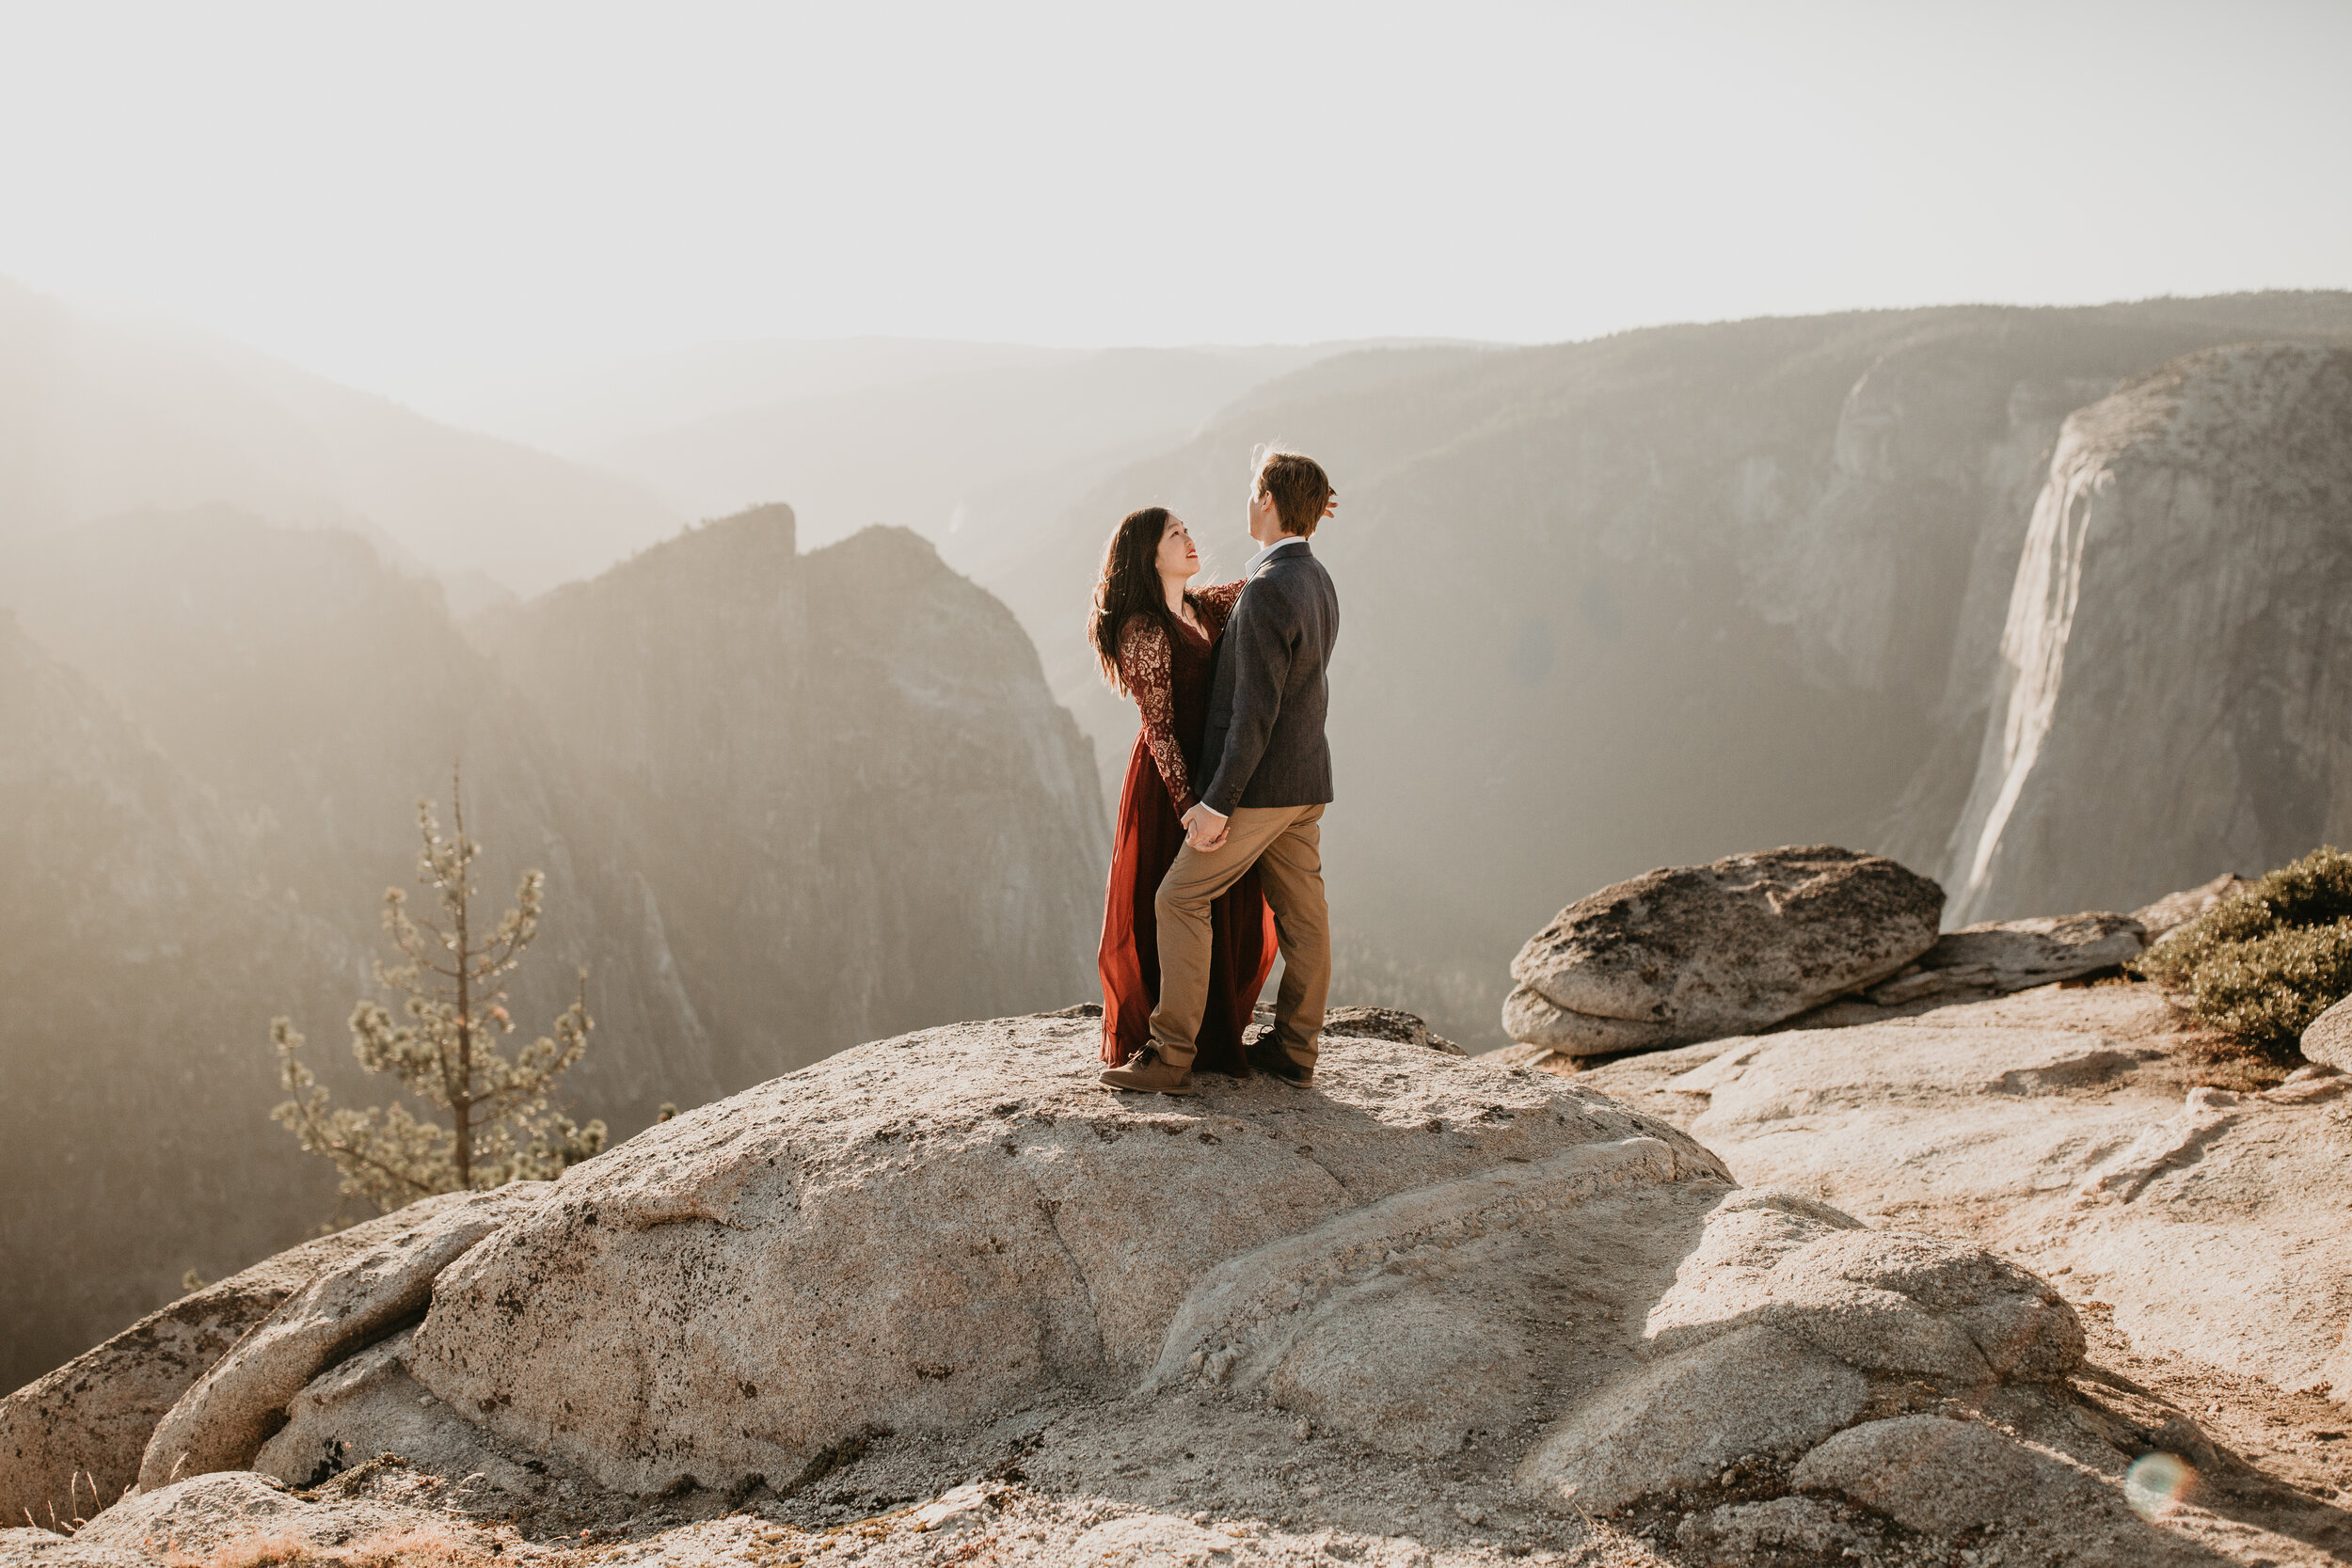 yosemite-national-park-couples-session-at-taft-point-and-yosemite-valley-yosemite-elopement-photographer-nicole-daacke-photography-129.jpg